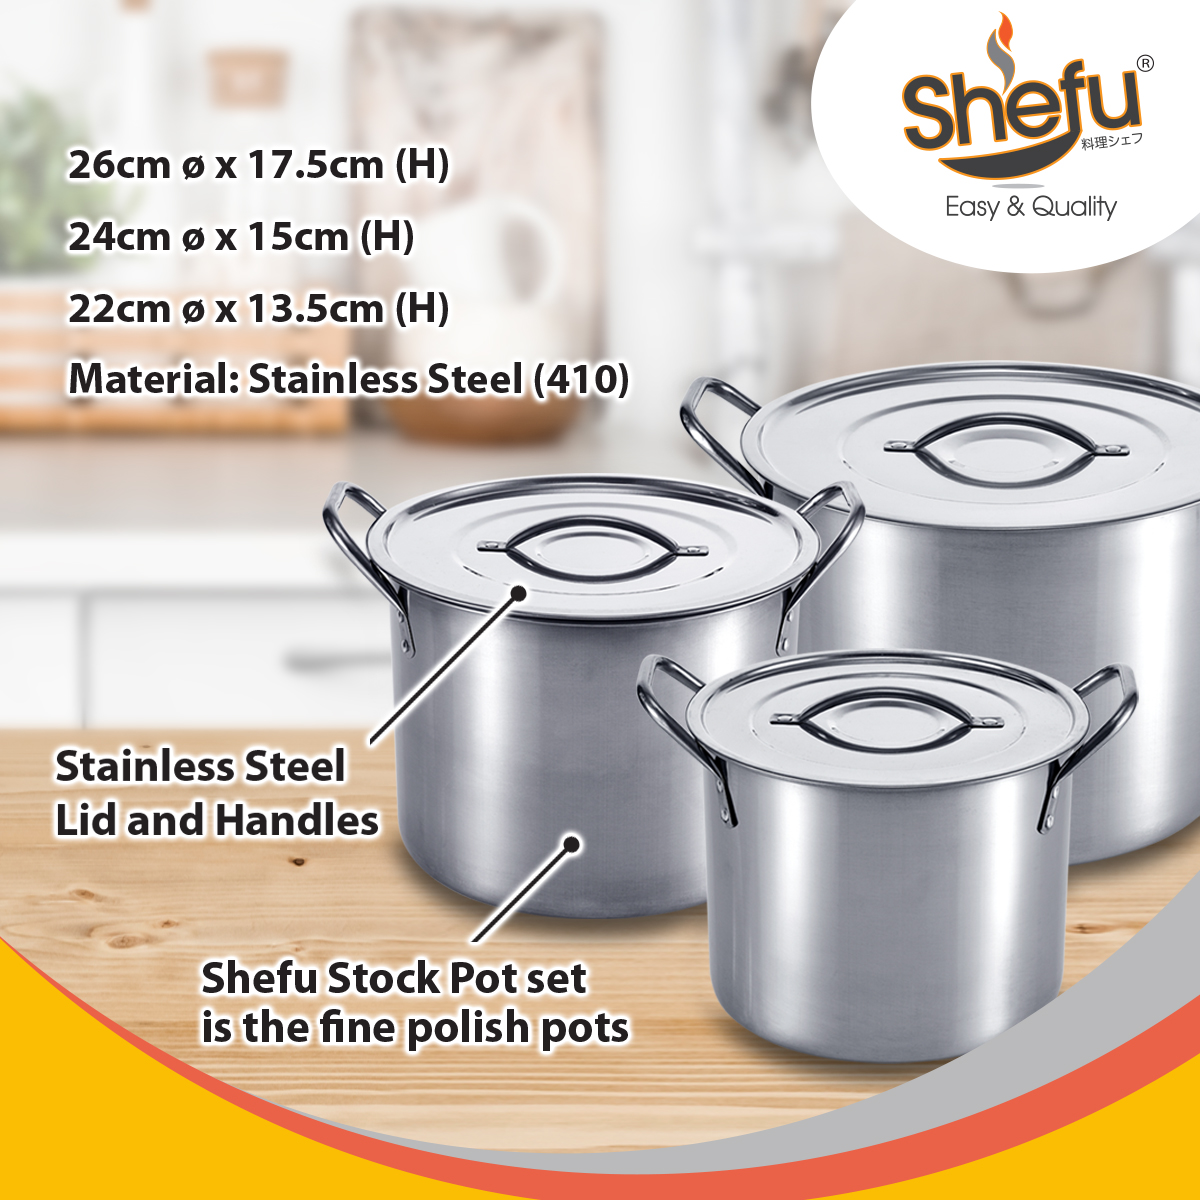 SHEFU Stainless Steel 3-In-1 Stock Pot